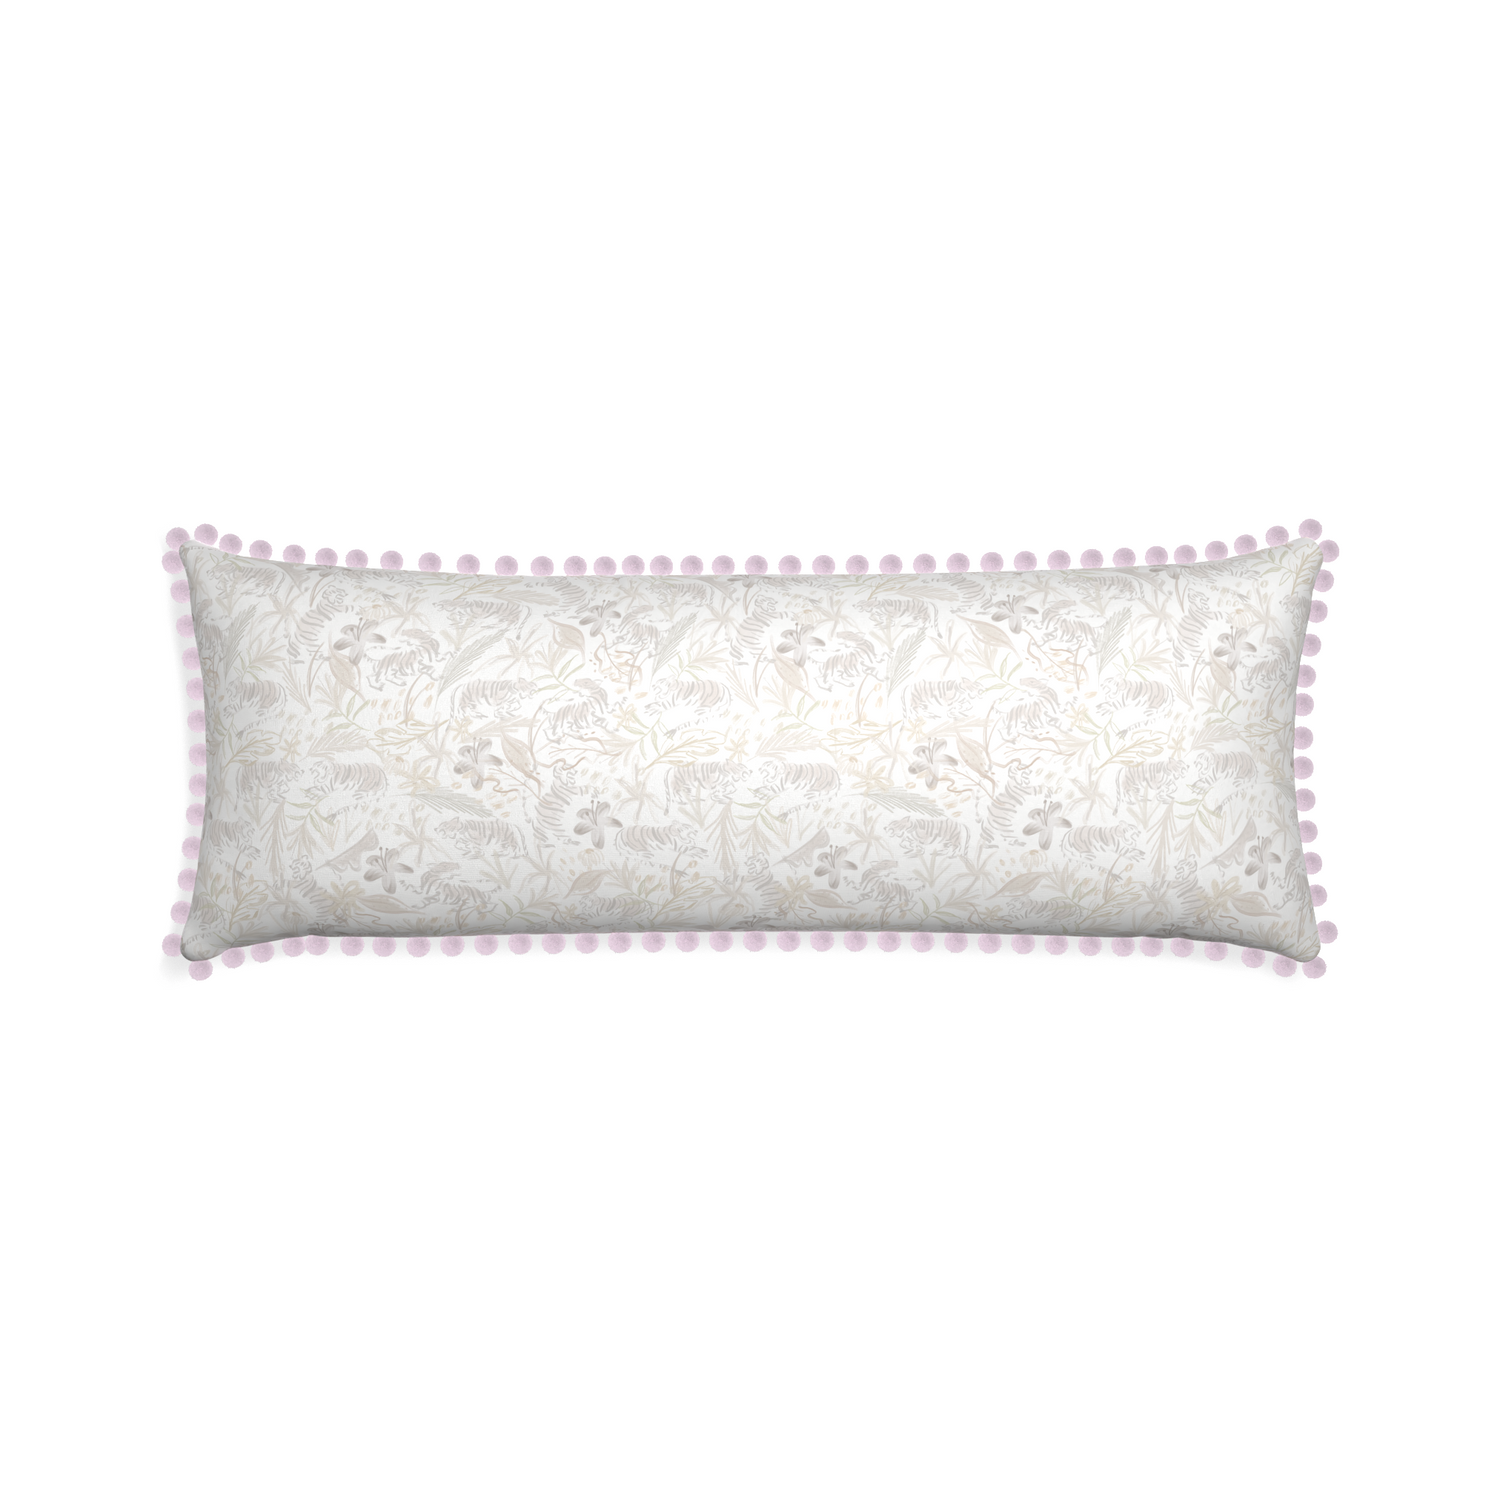 Xl-lumbar frida sand custom pillow with l on white background